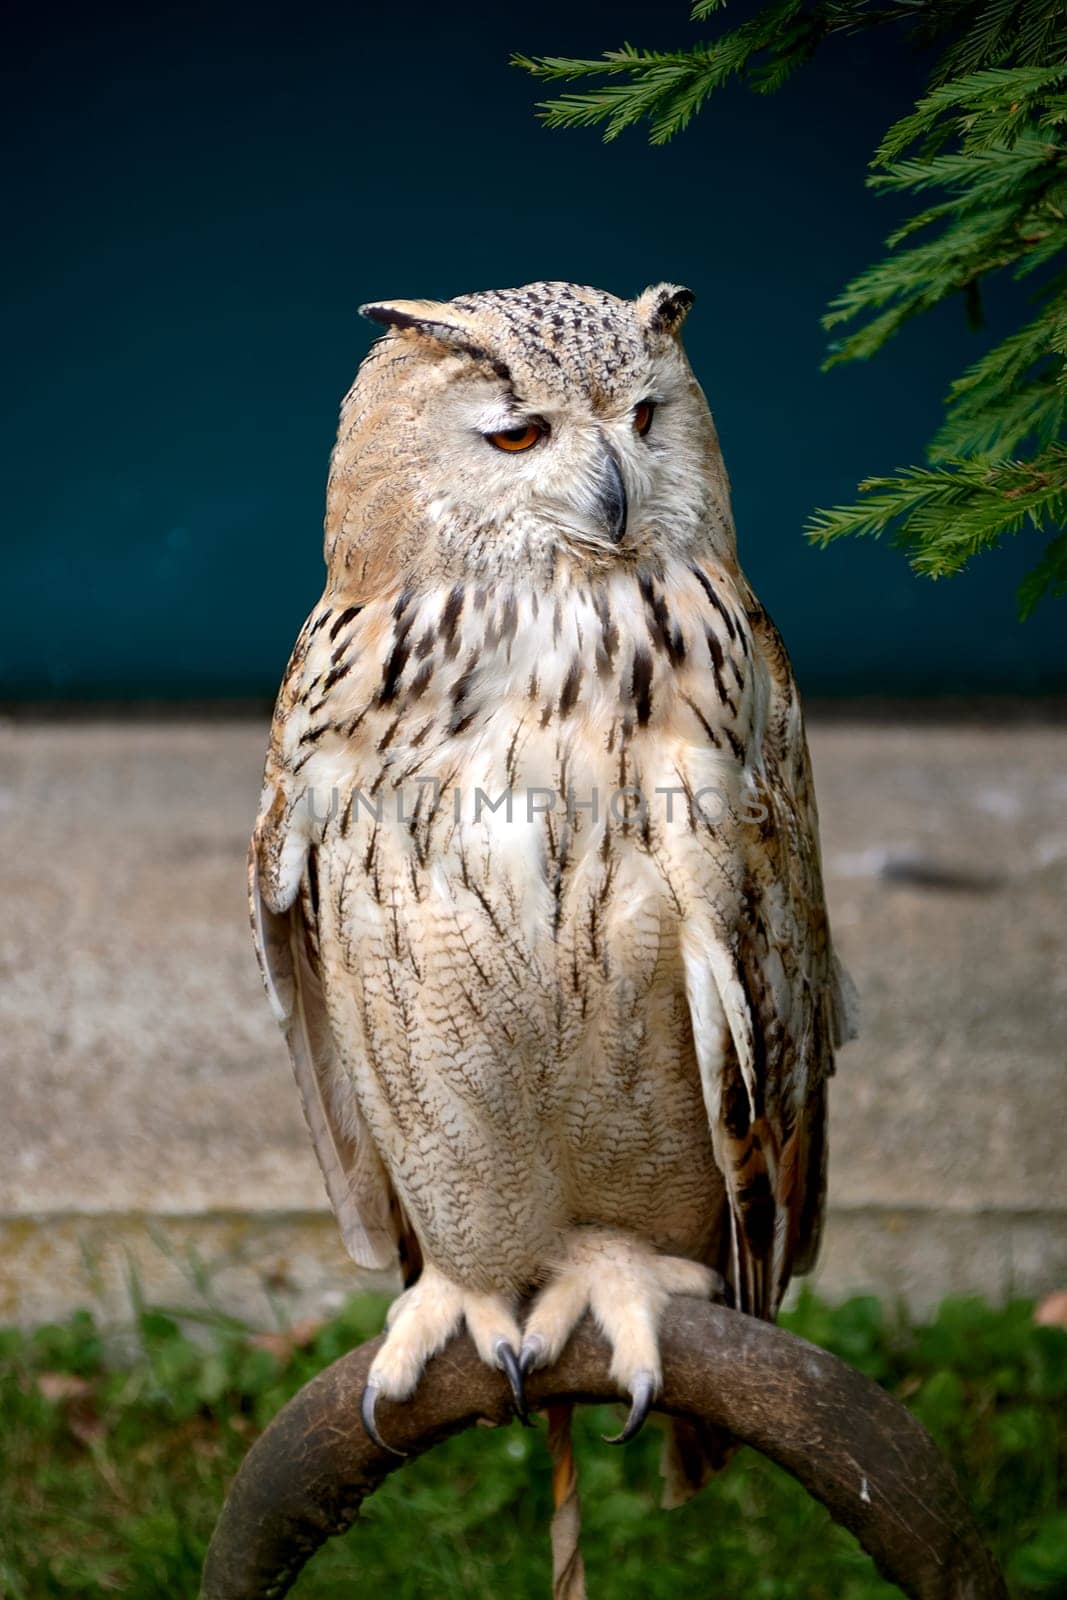 An owl perched on a perch waiting for game. Head, ring, tranquillity, eyes, beaks, fur, feathers, texture, out-of-focus background